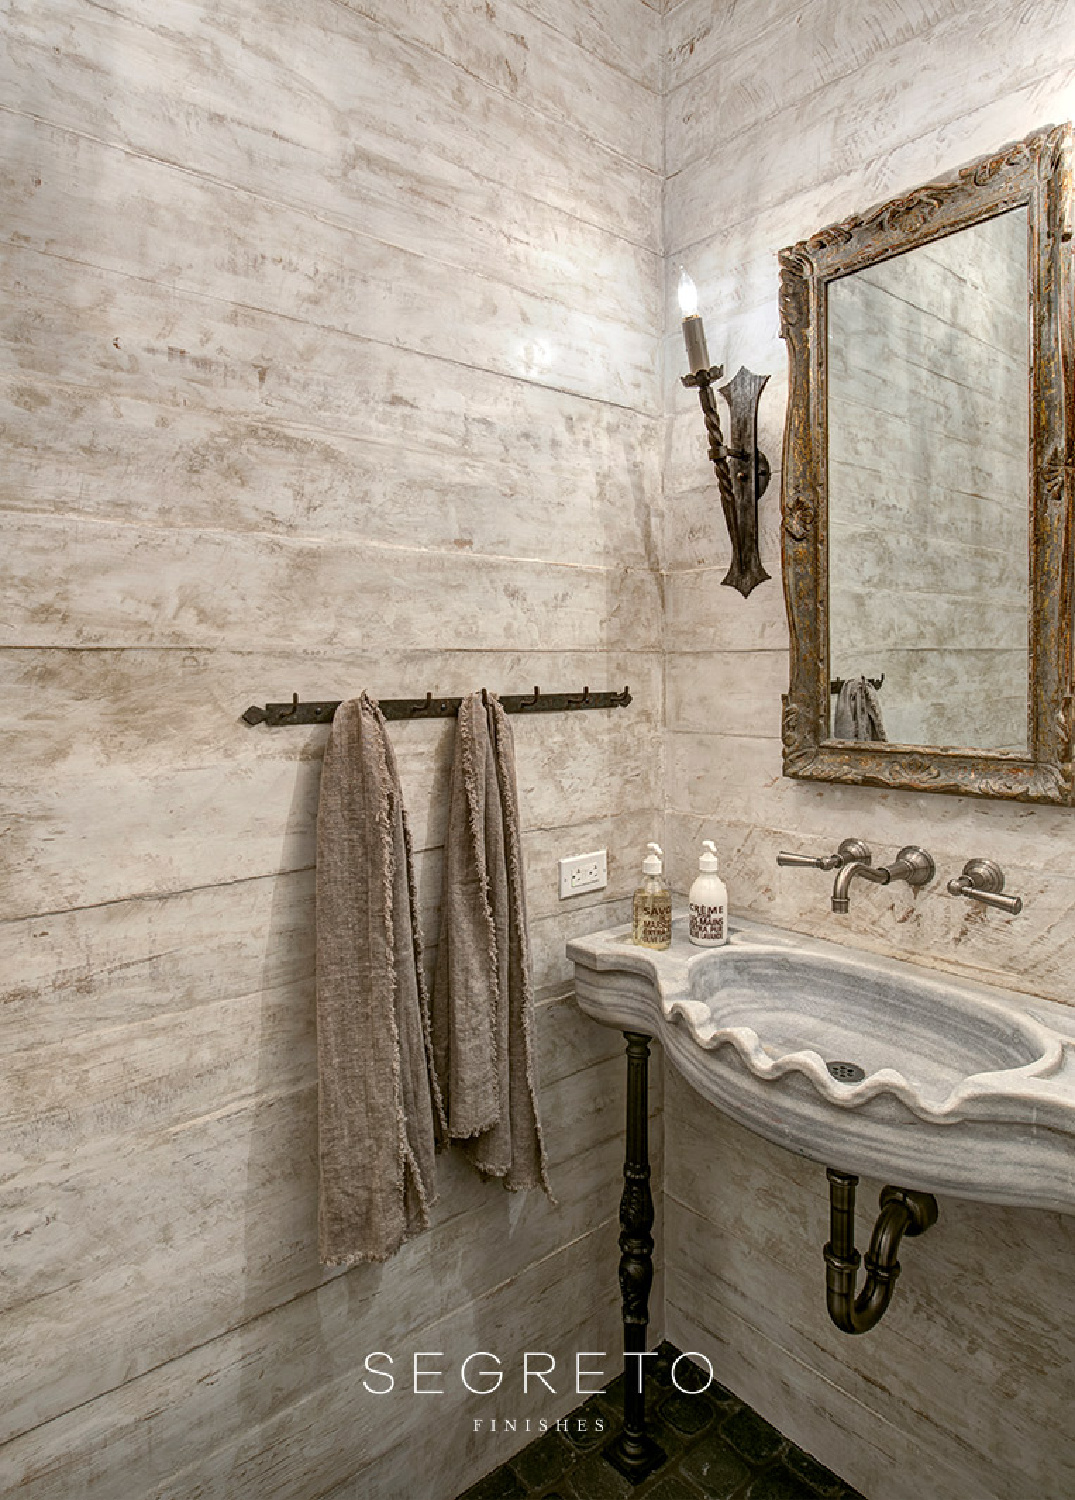 Luxurious and serene bath with finishes by Segreto Finishes.